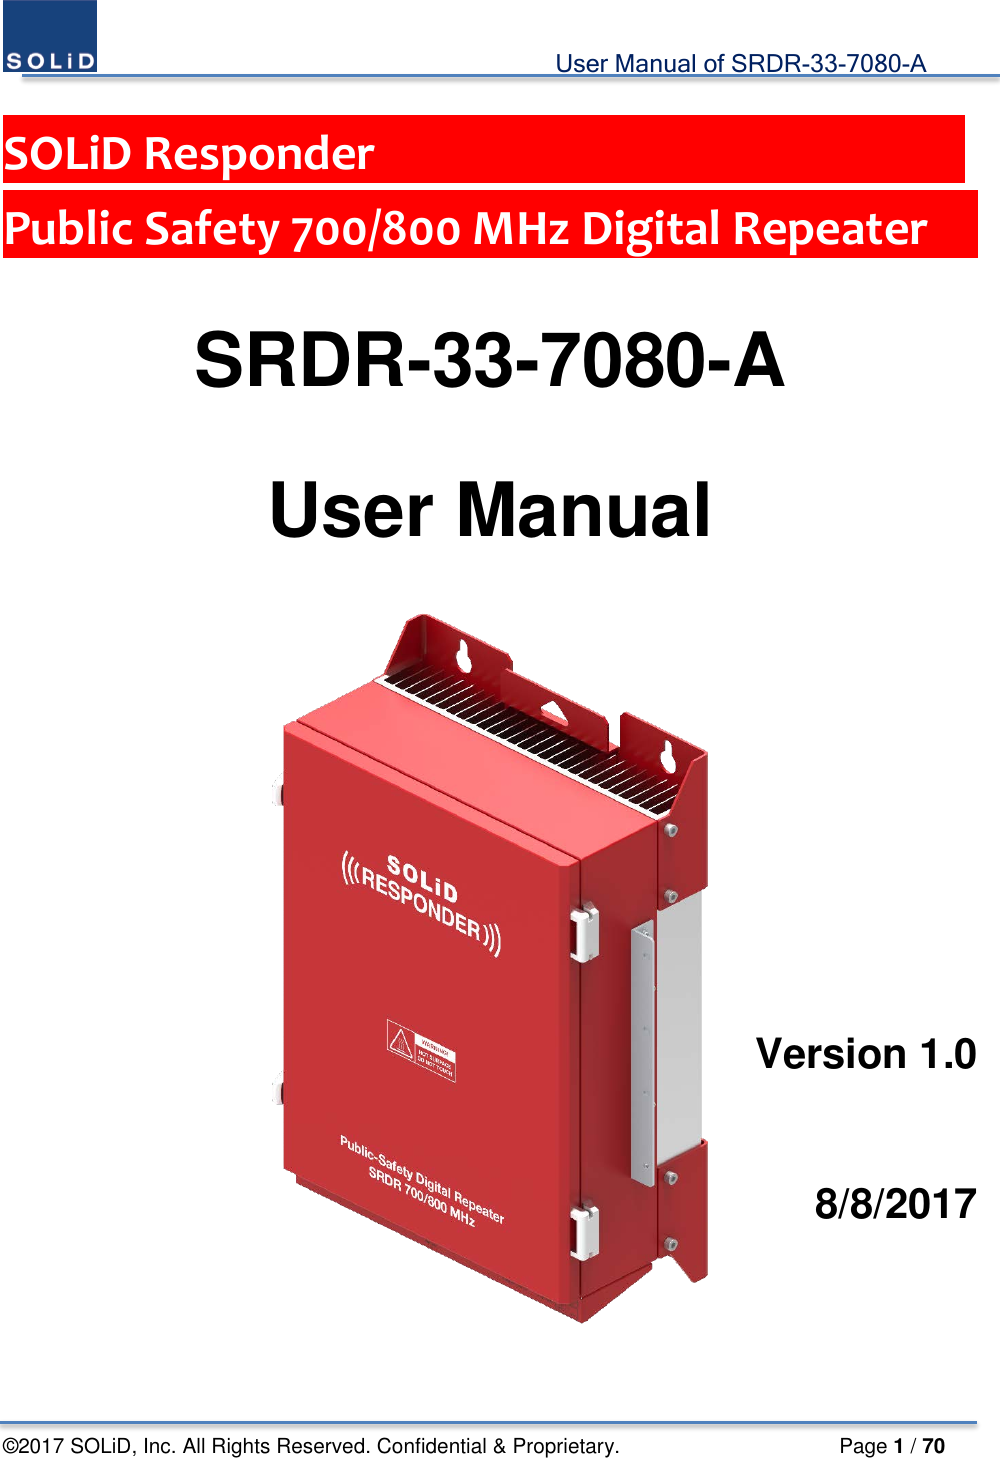                                             User Manual of SRDR-33-7080-A ©2017 SOLiD, Inc. All Rights Reserved. Confidential &amp; Proprietary.                     Page 1 / 70  SOLiD Responder                         Public Safety 700/800 MHz Digital Repeater      SRDR-33-7080-A  User Manual        Version 1.0    8/8/2017    